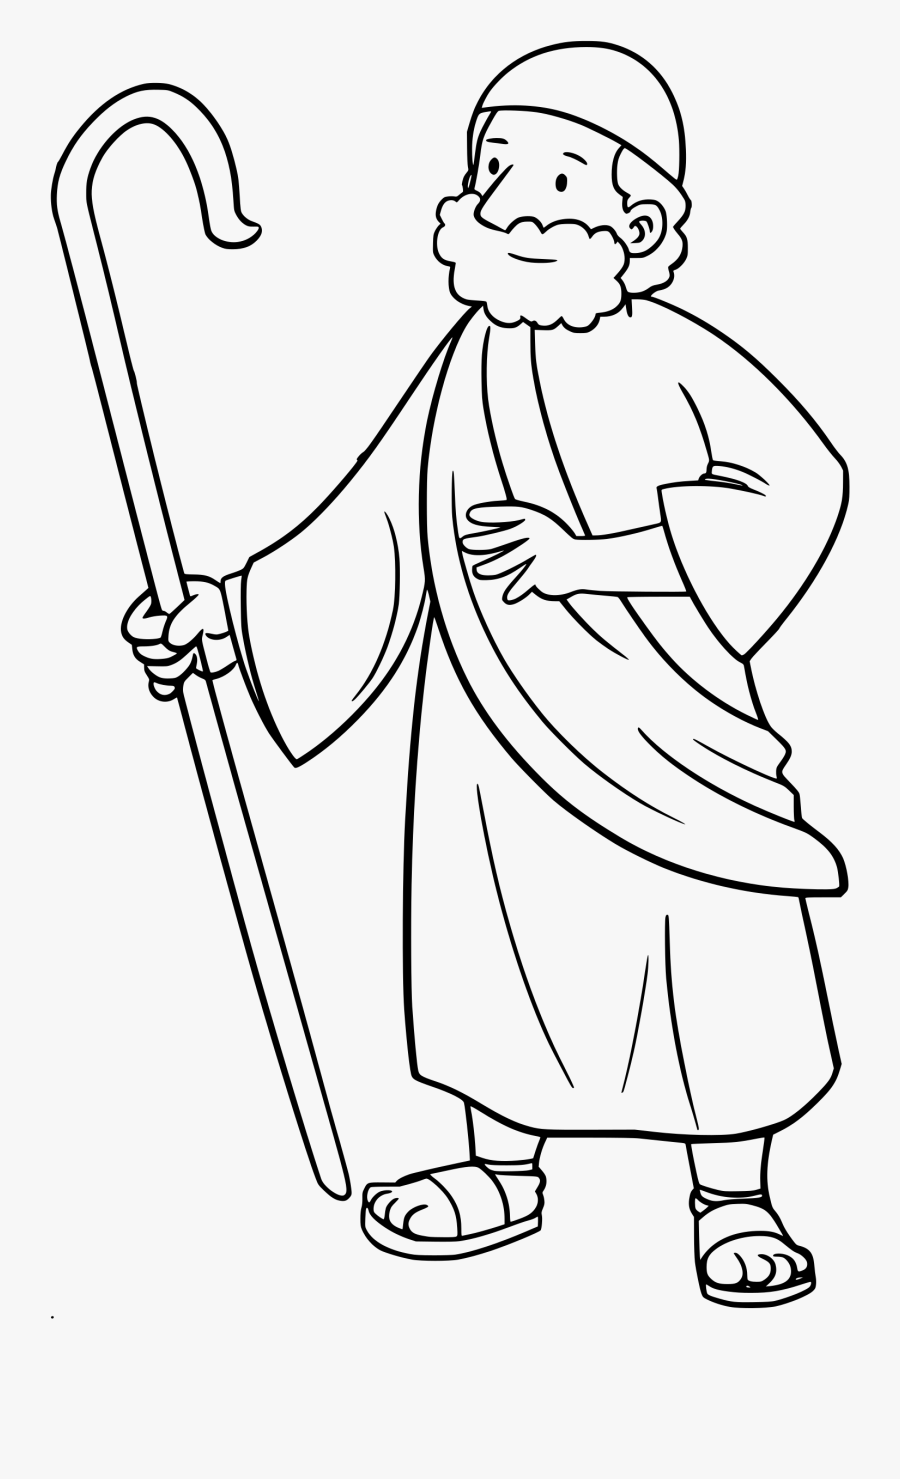 Moses The Shepherd Vector Clipart Image - Moses Clipart Black And White, Transparent Clipart